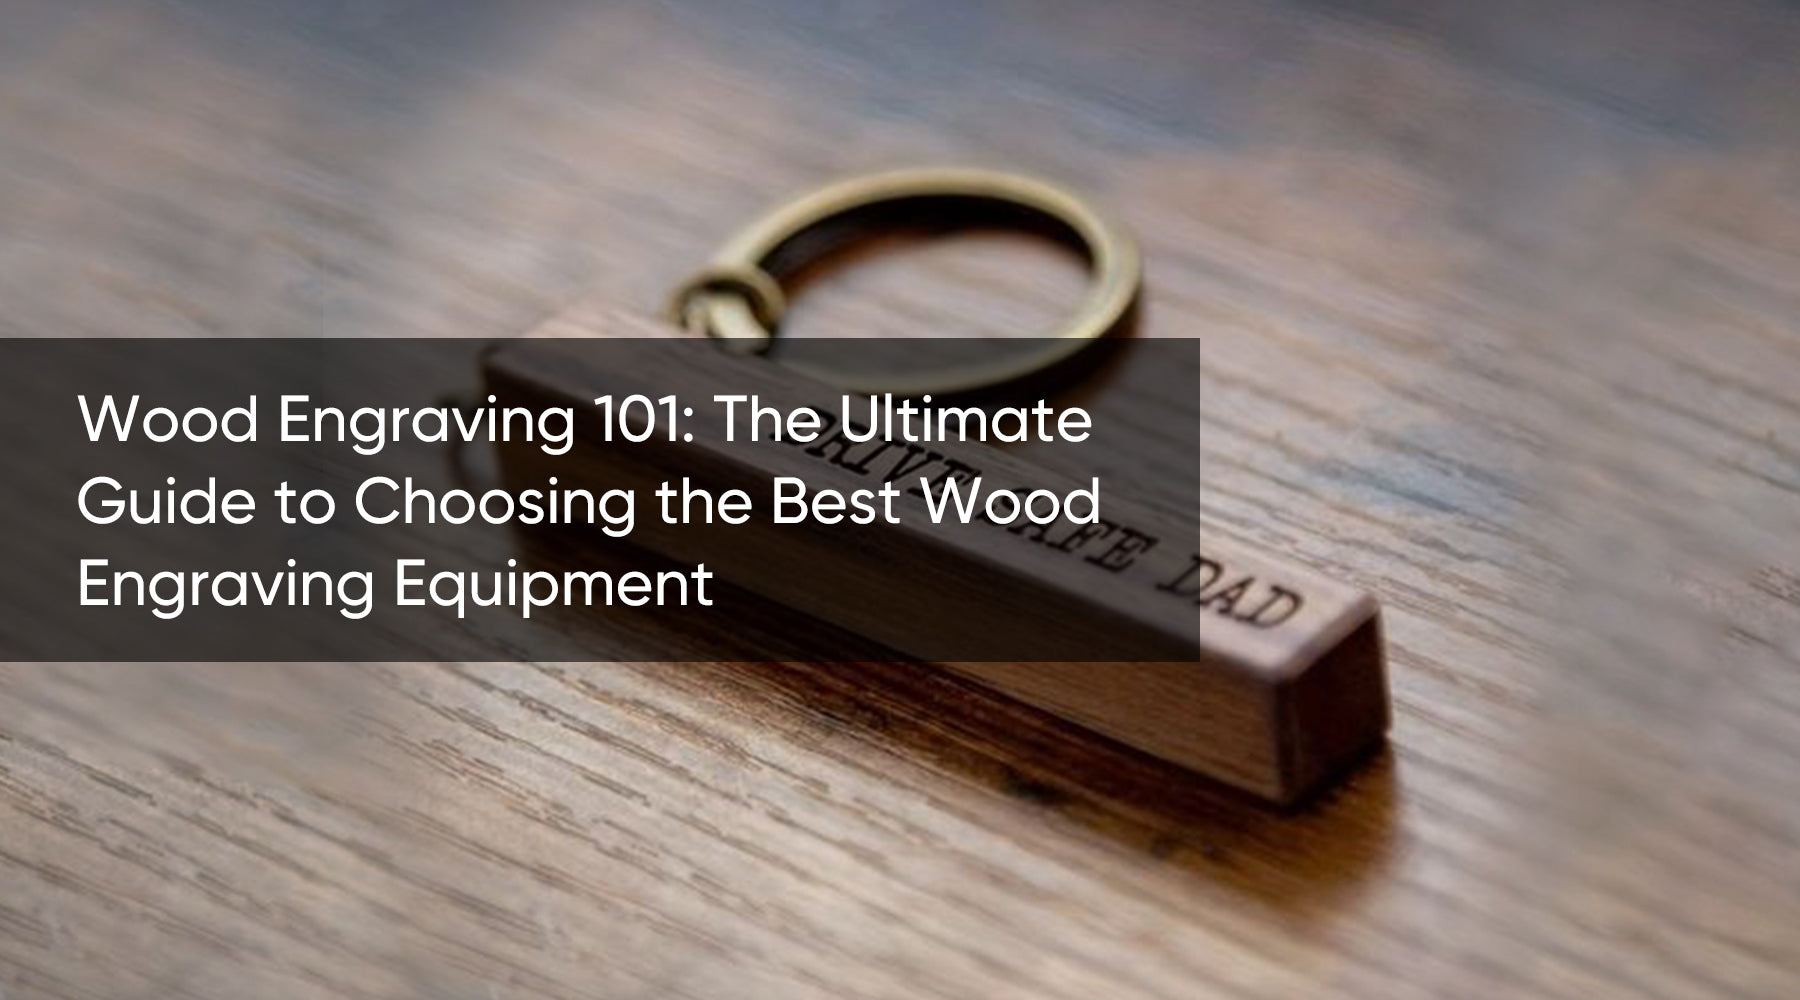 Learn the Best Wood Engraving Equipment - The Ultimate Guide